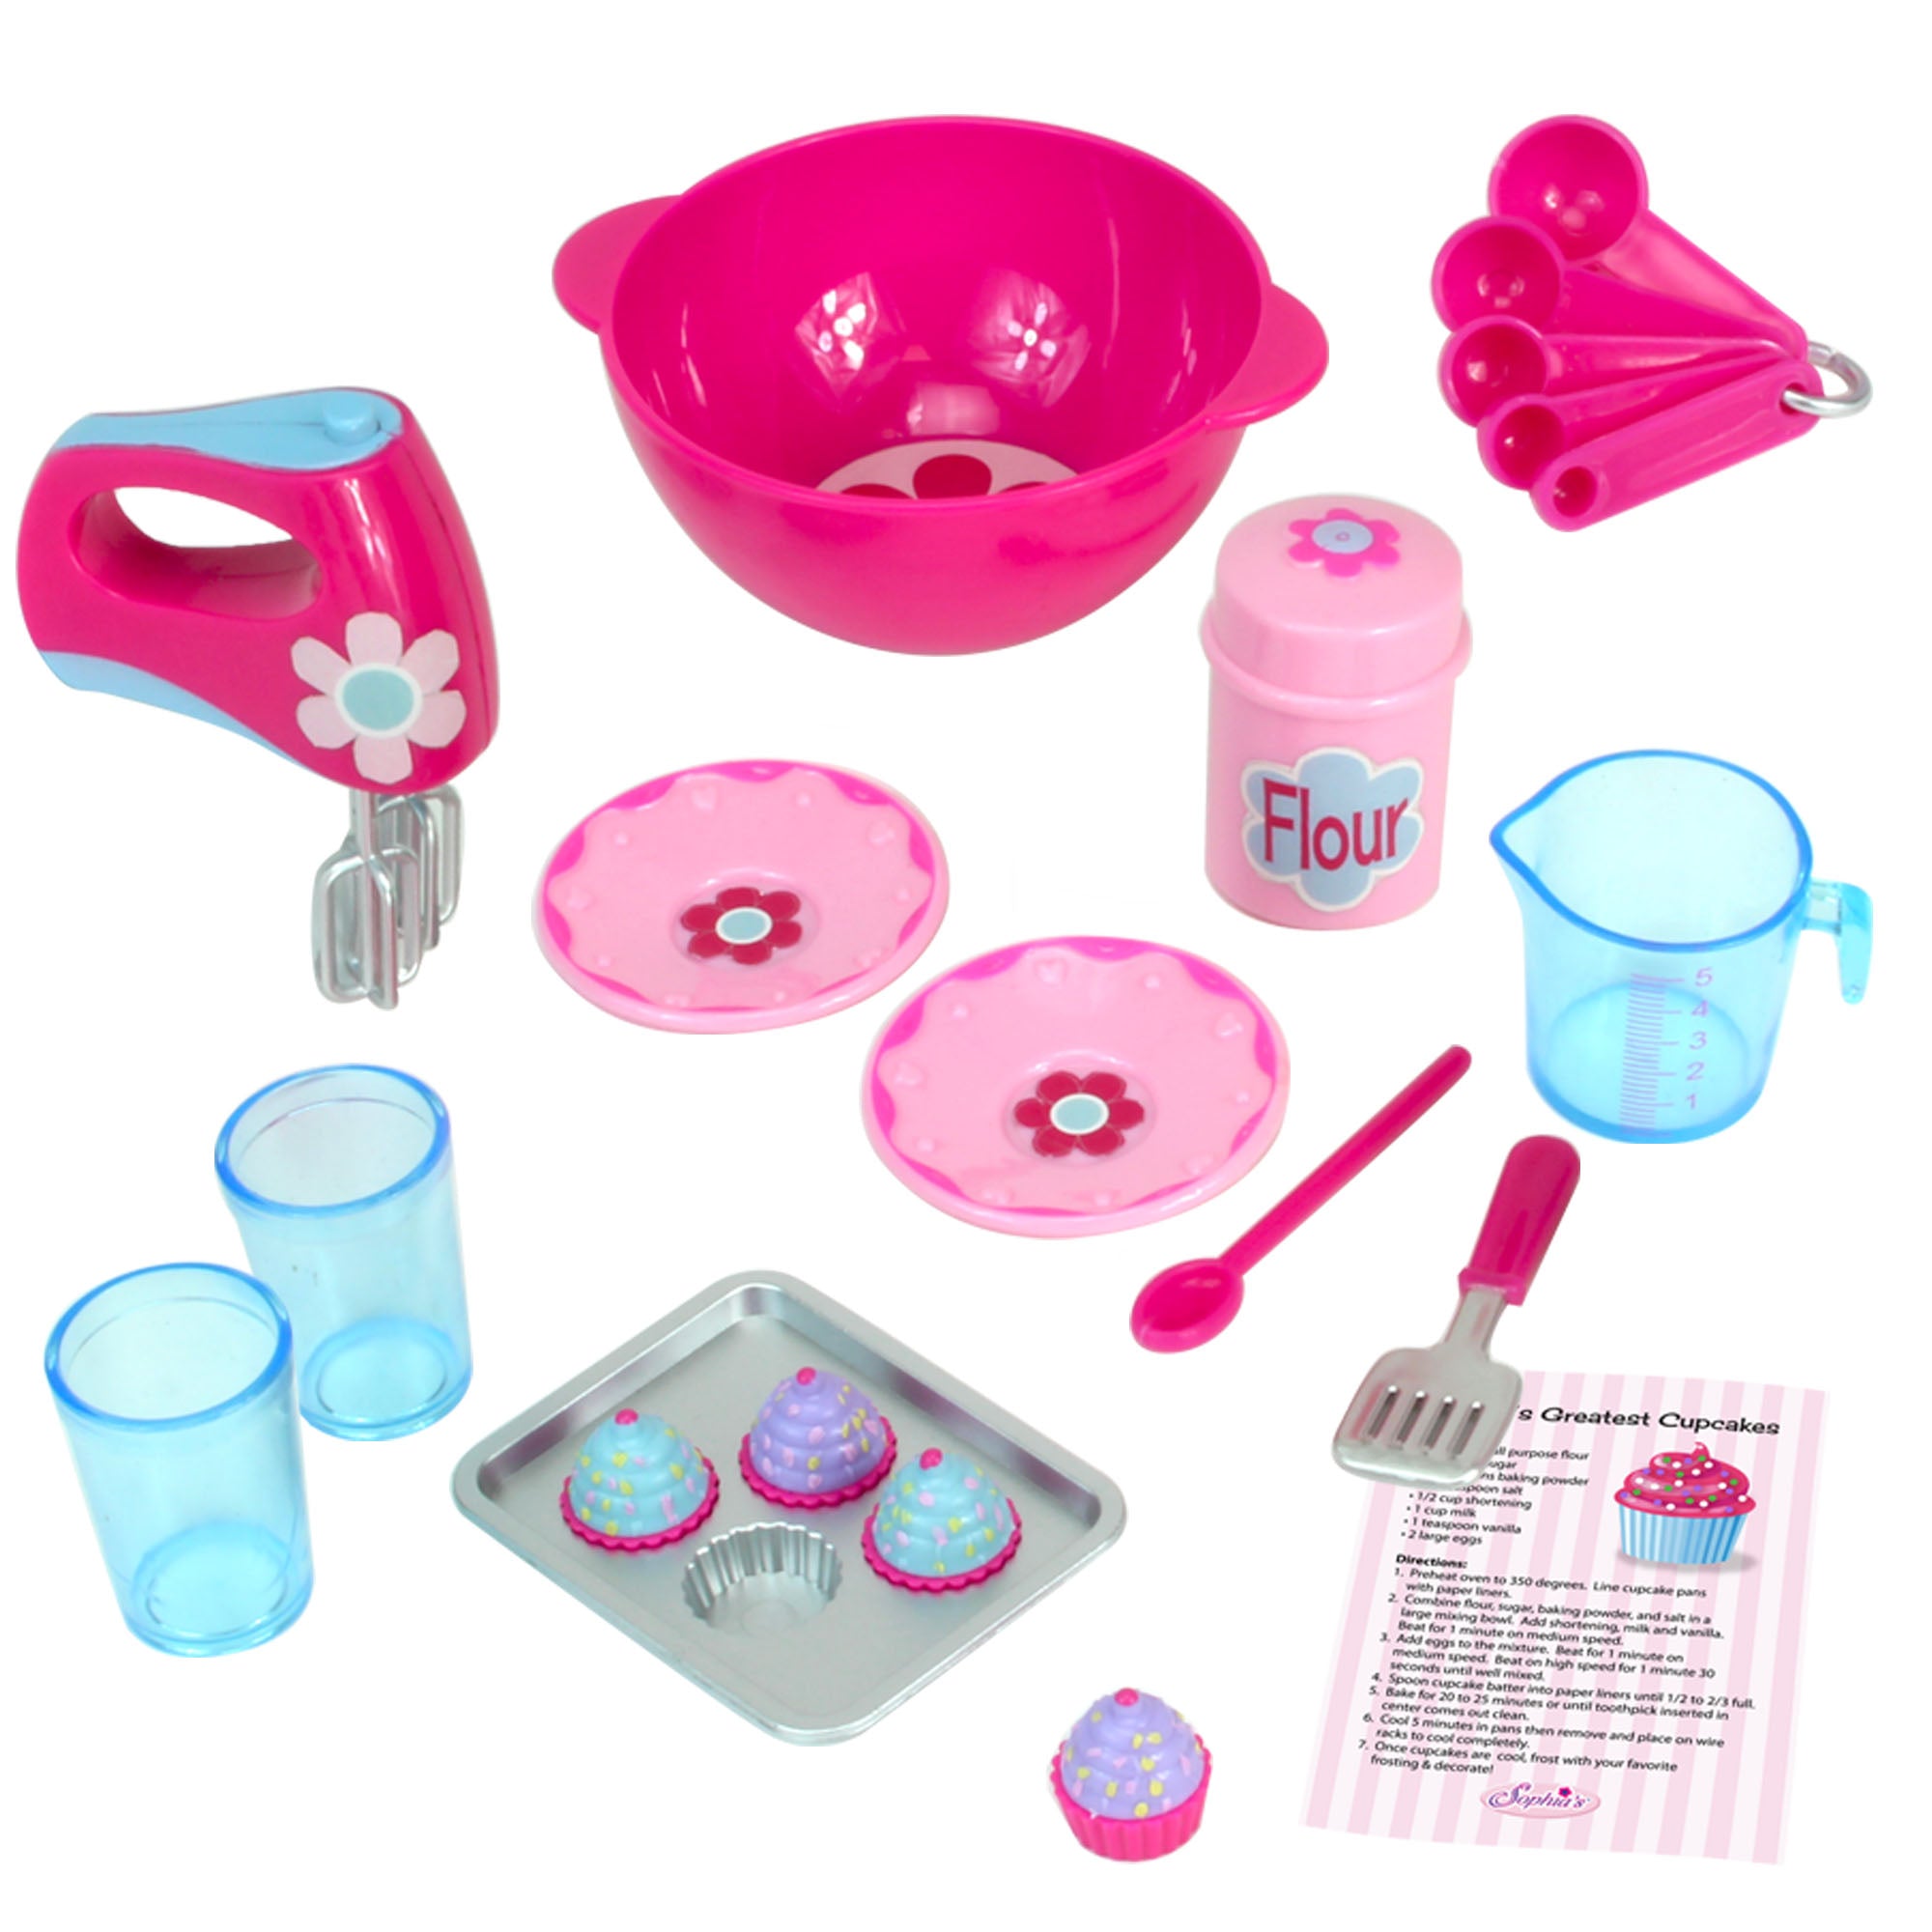 Sophia's Baking Accessories and Apron Set for 18" Dolls, Pink